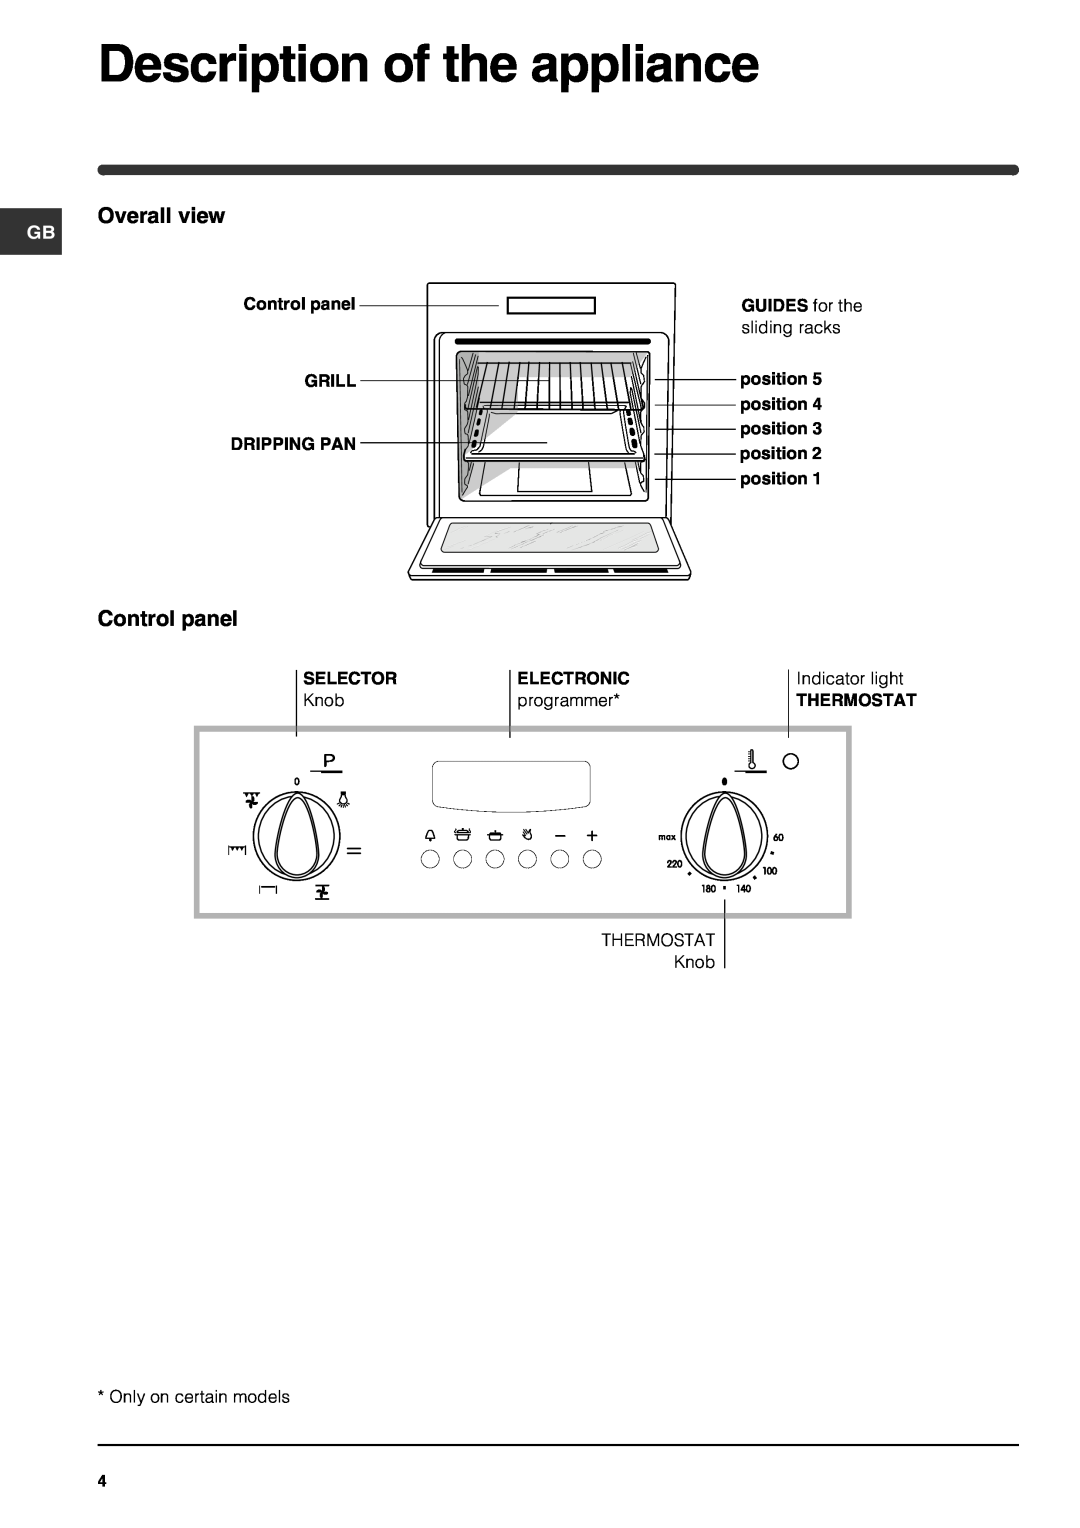 Indesit FIE 56 K.B GB operating instructions Description of the appliance, Overall view, Control panel 